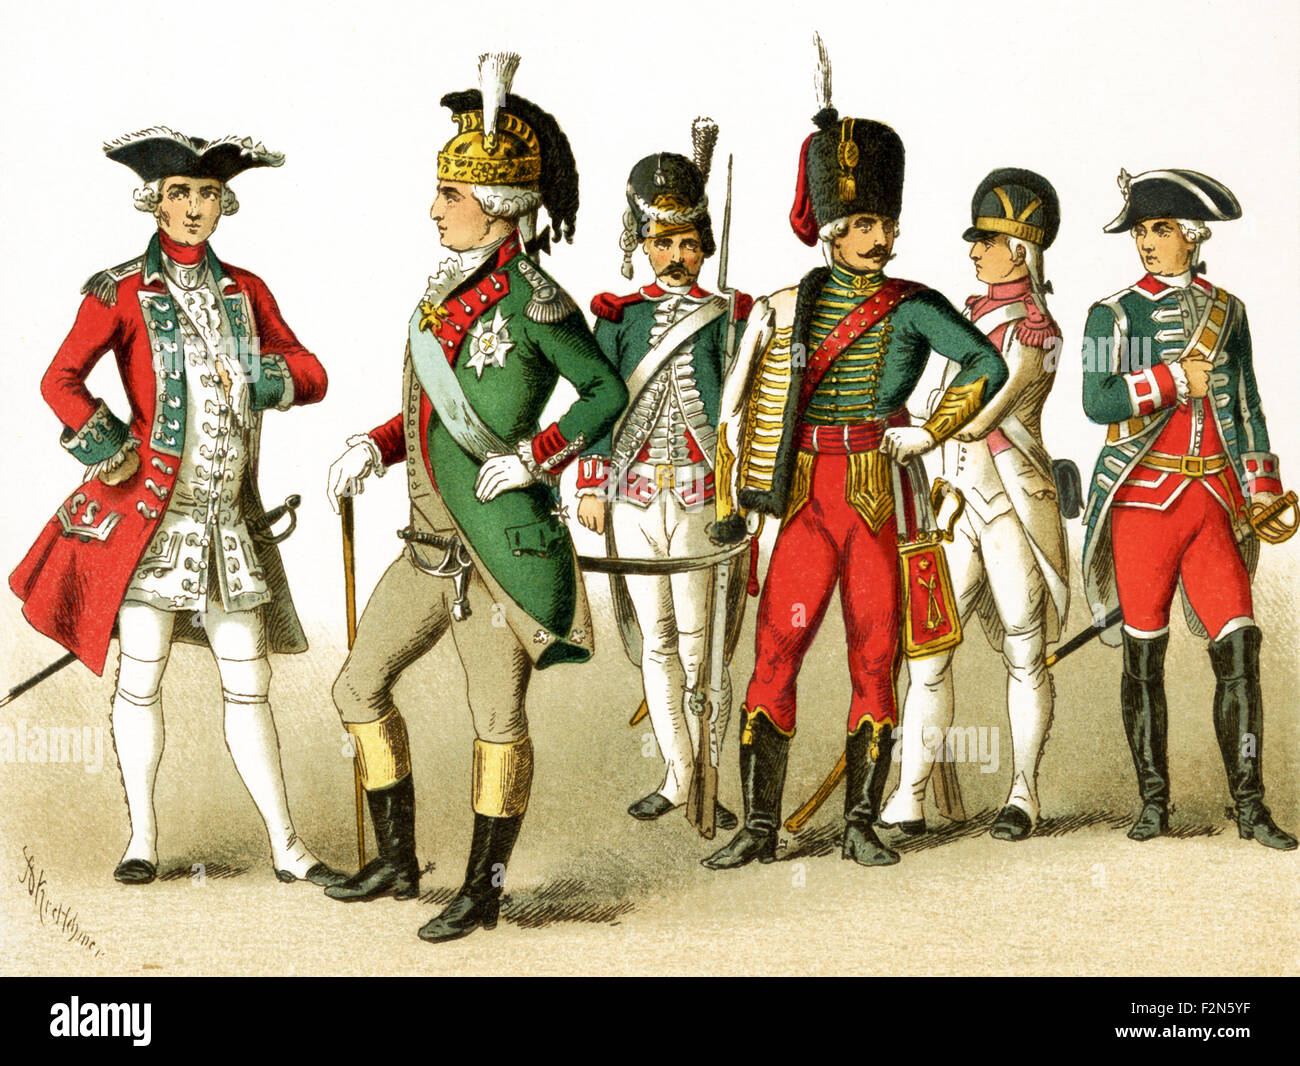 The figures pictured here represent military figures in Europe from around 1700. They are, from left to right: officer of the Swiss Guard, Colonel of Dragoons, Grenadier General, Officer of Hussars, Infantry of the Line, Body Guard. The illustration dates to 1882. Stock Photo